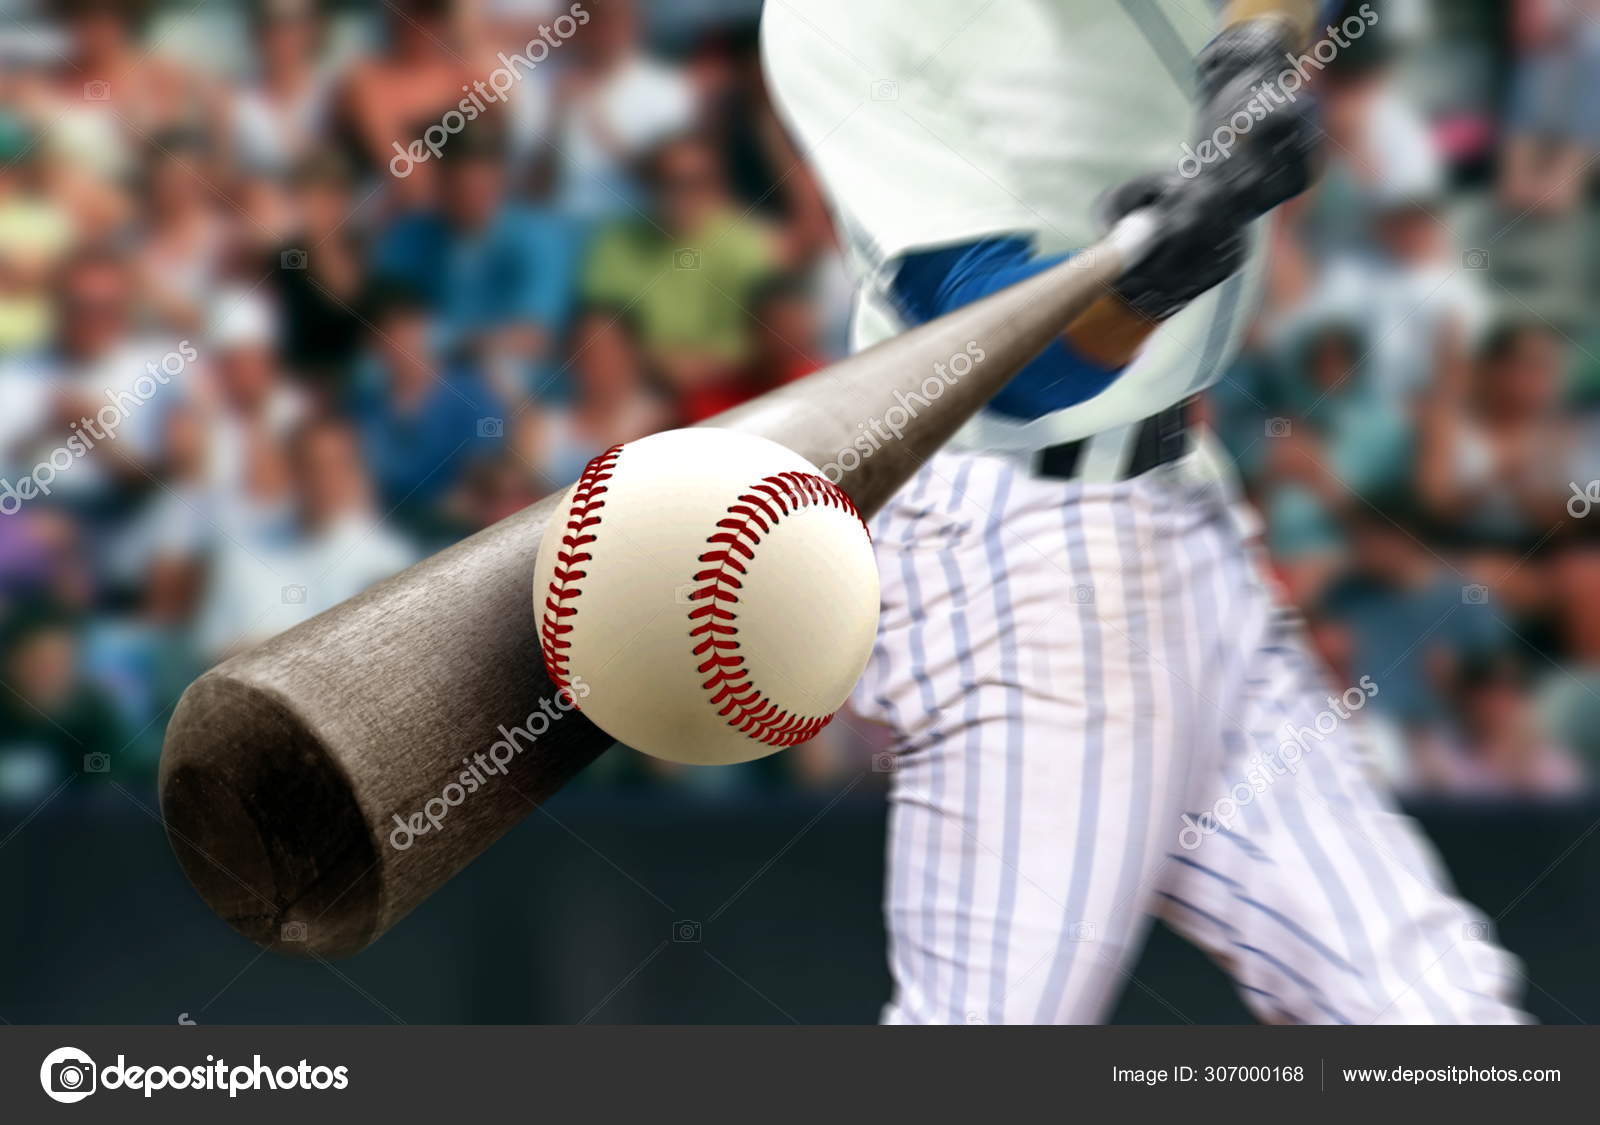 Picture Of A Baseball Bat And Ball